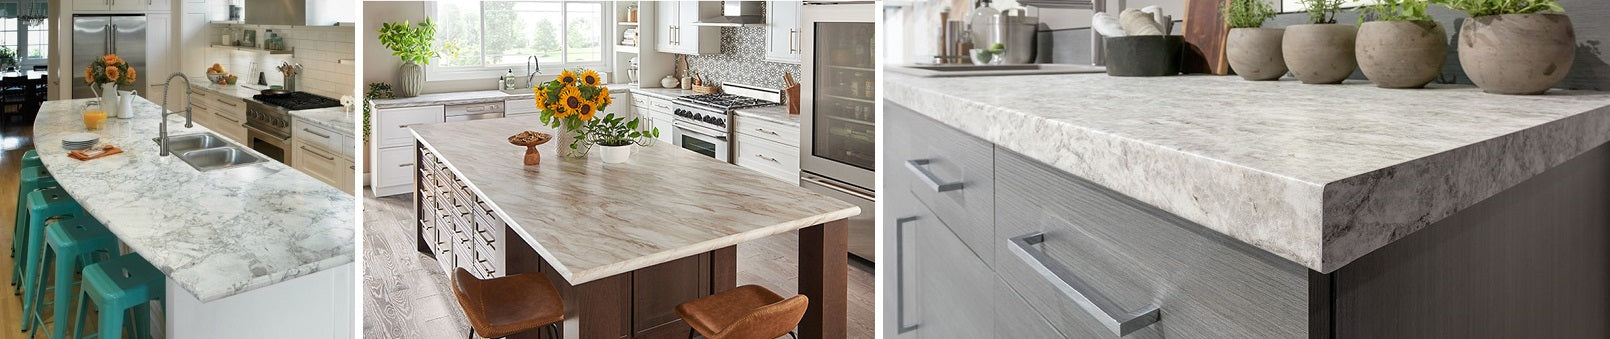 Laminate Countertops, the least expensive option for counter tops still